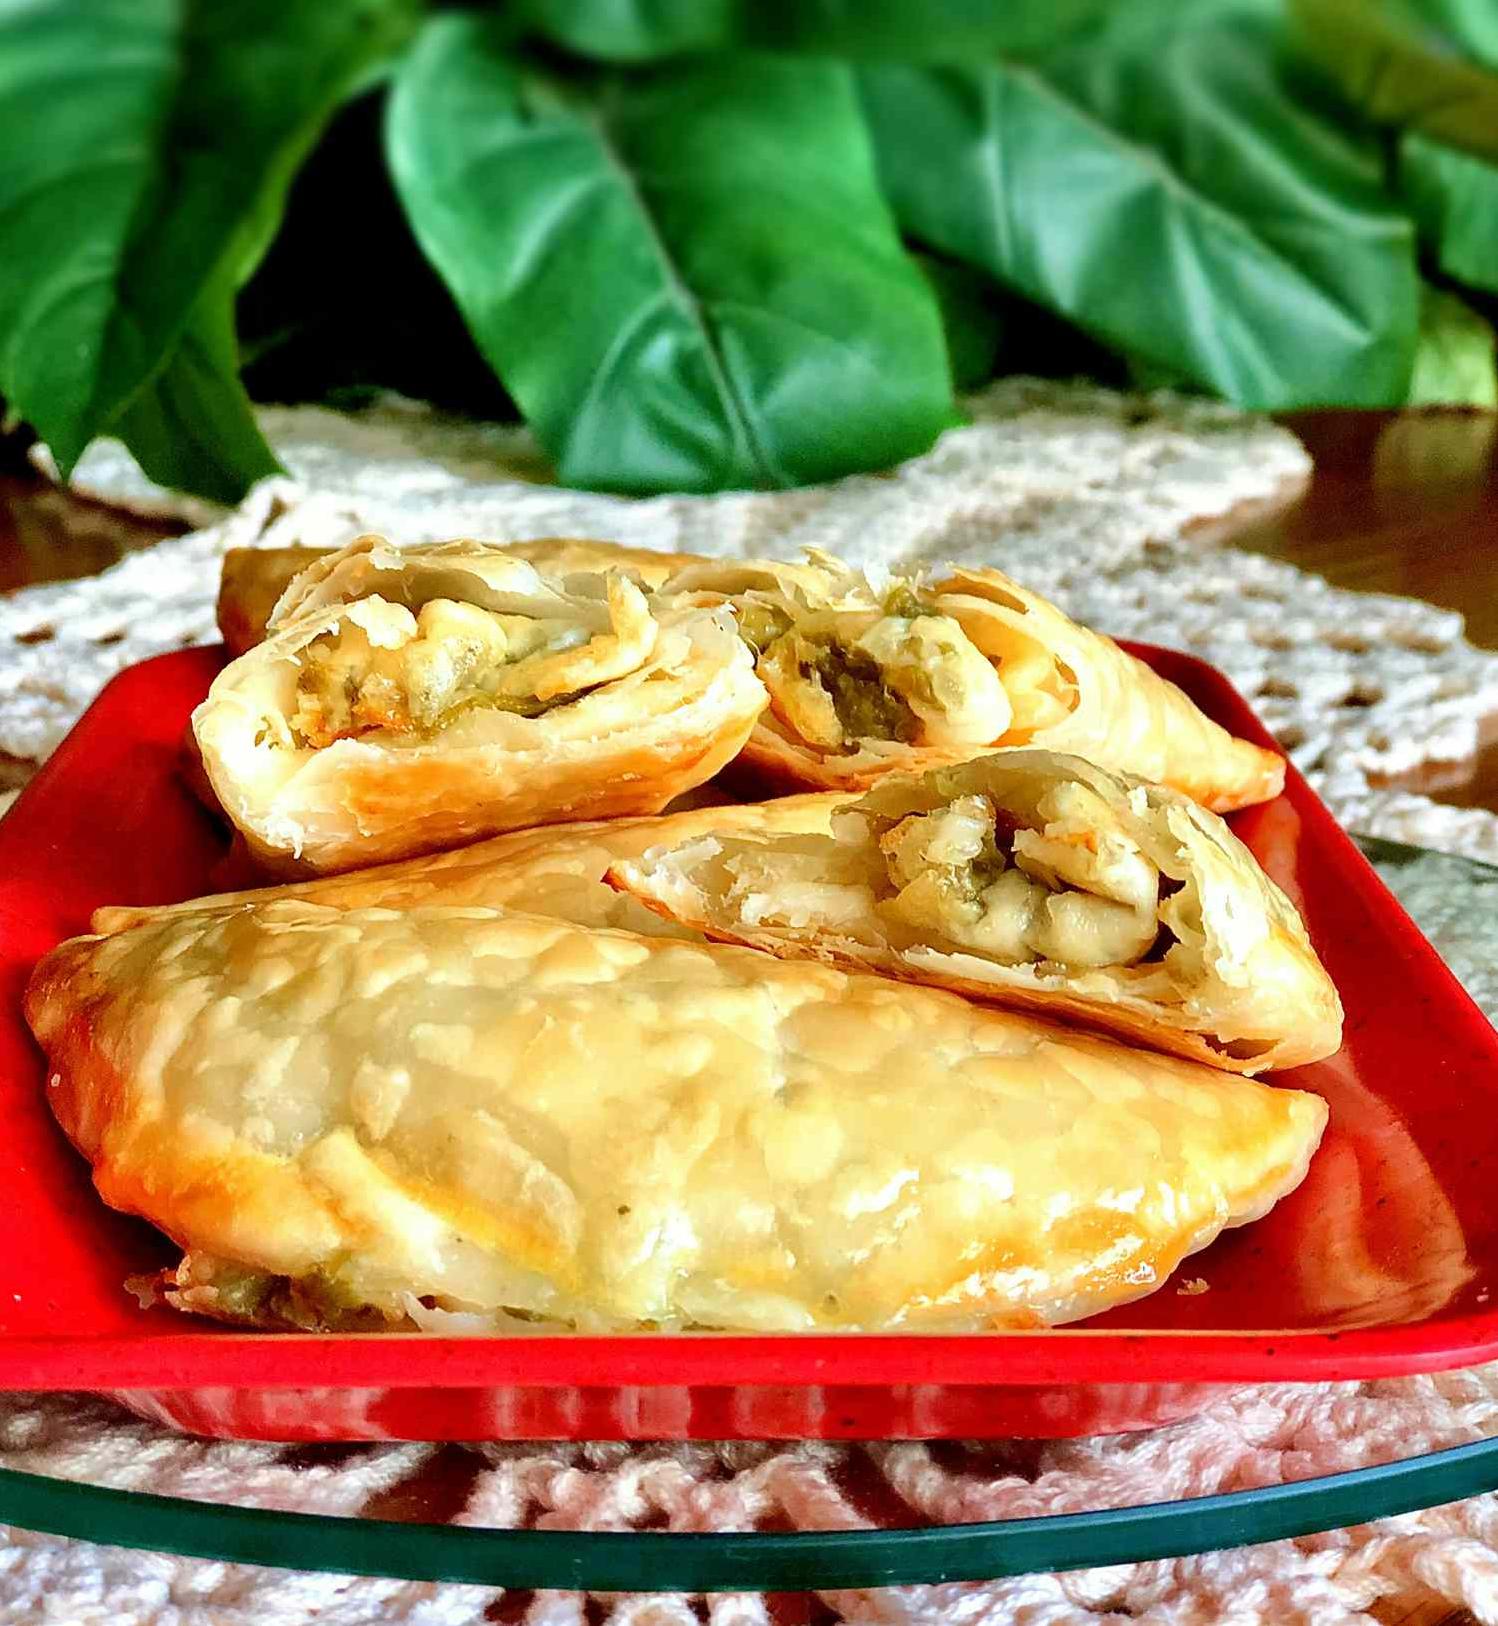  Don't let their small size fool you--these Empanadas Con Queso pack a big flavor punch!